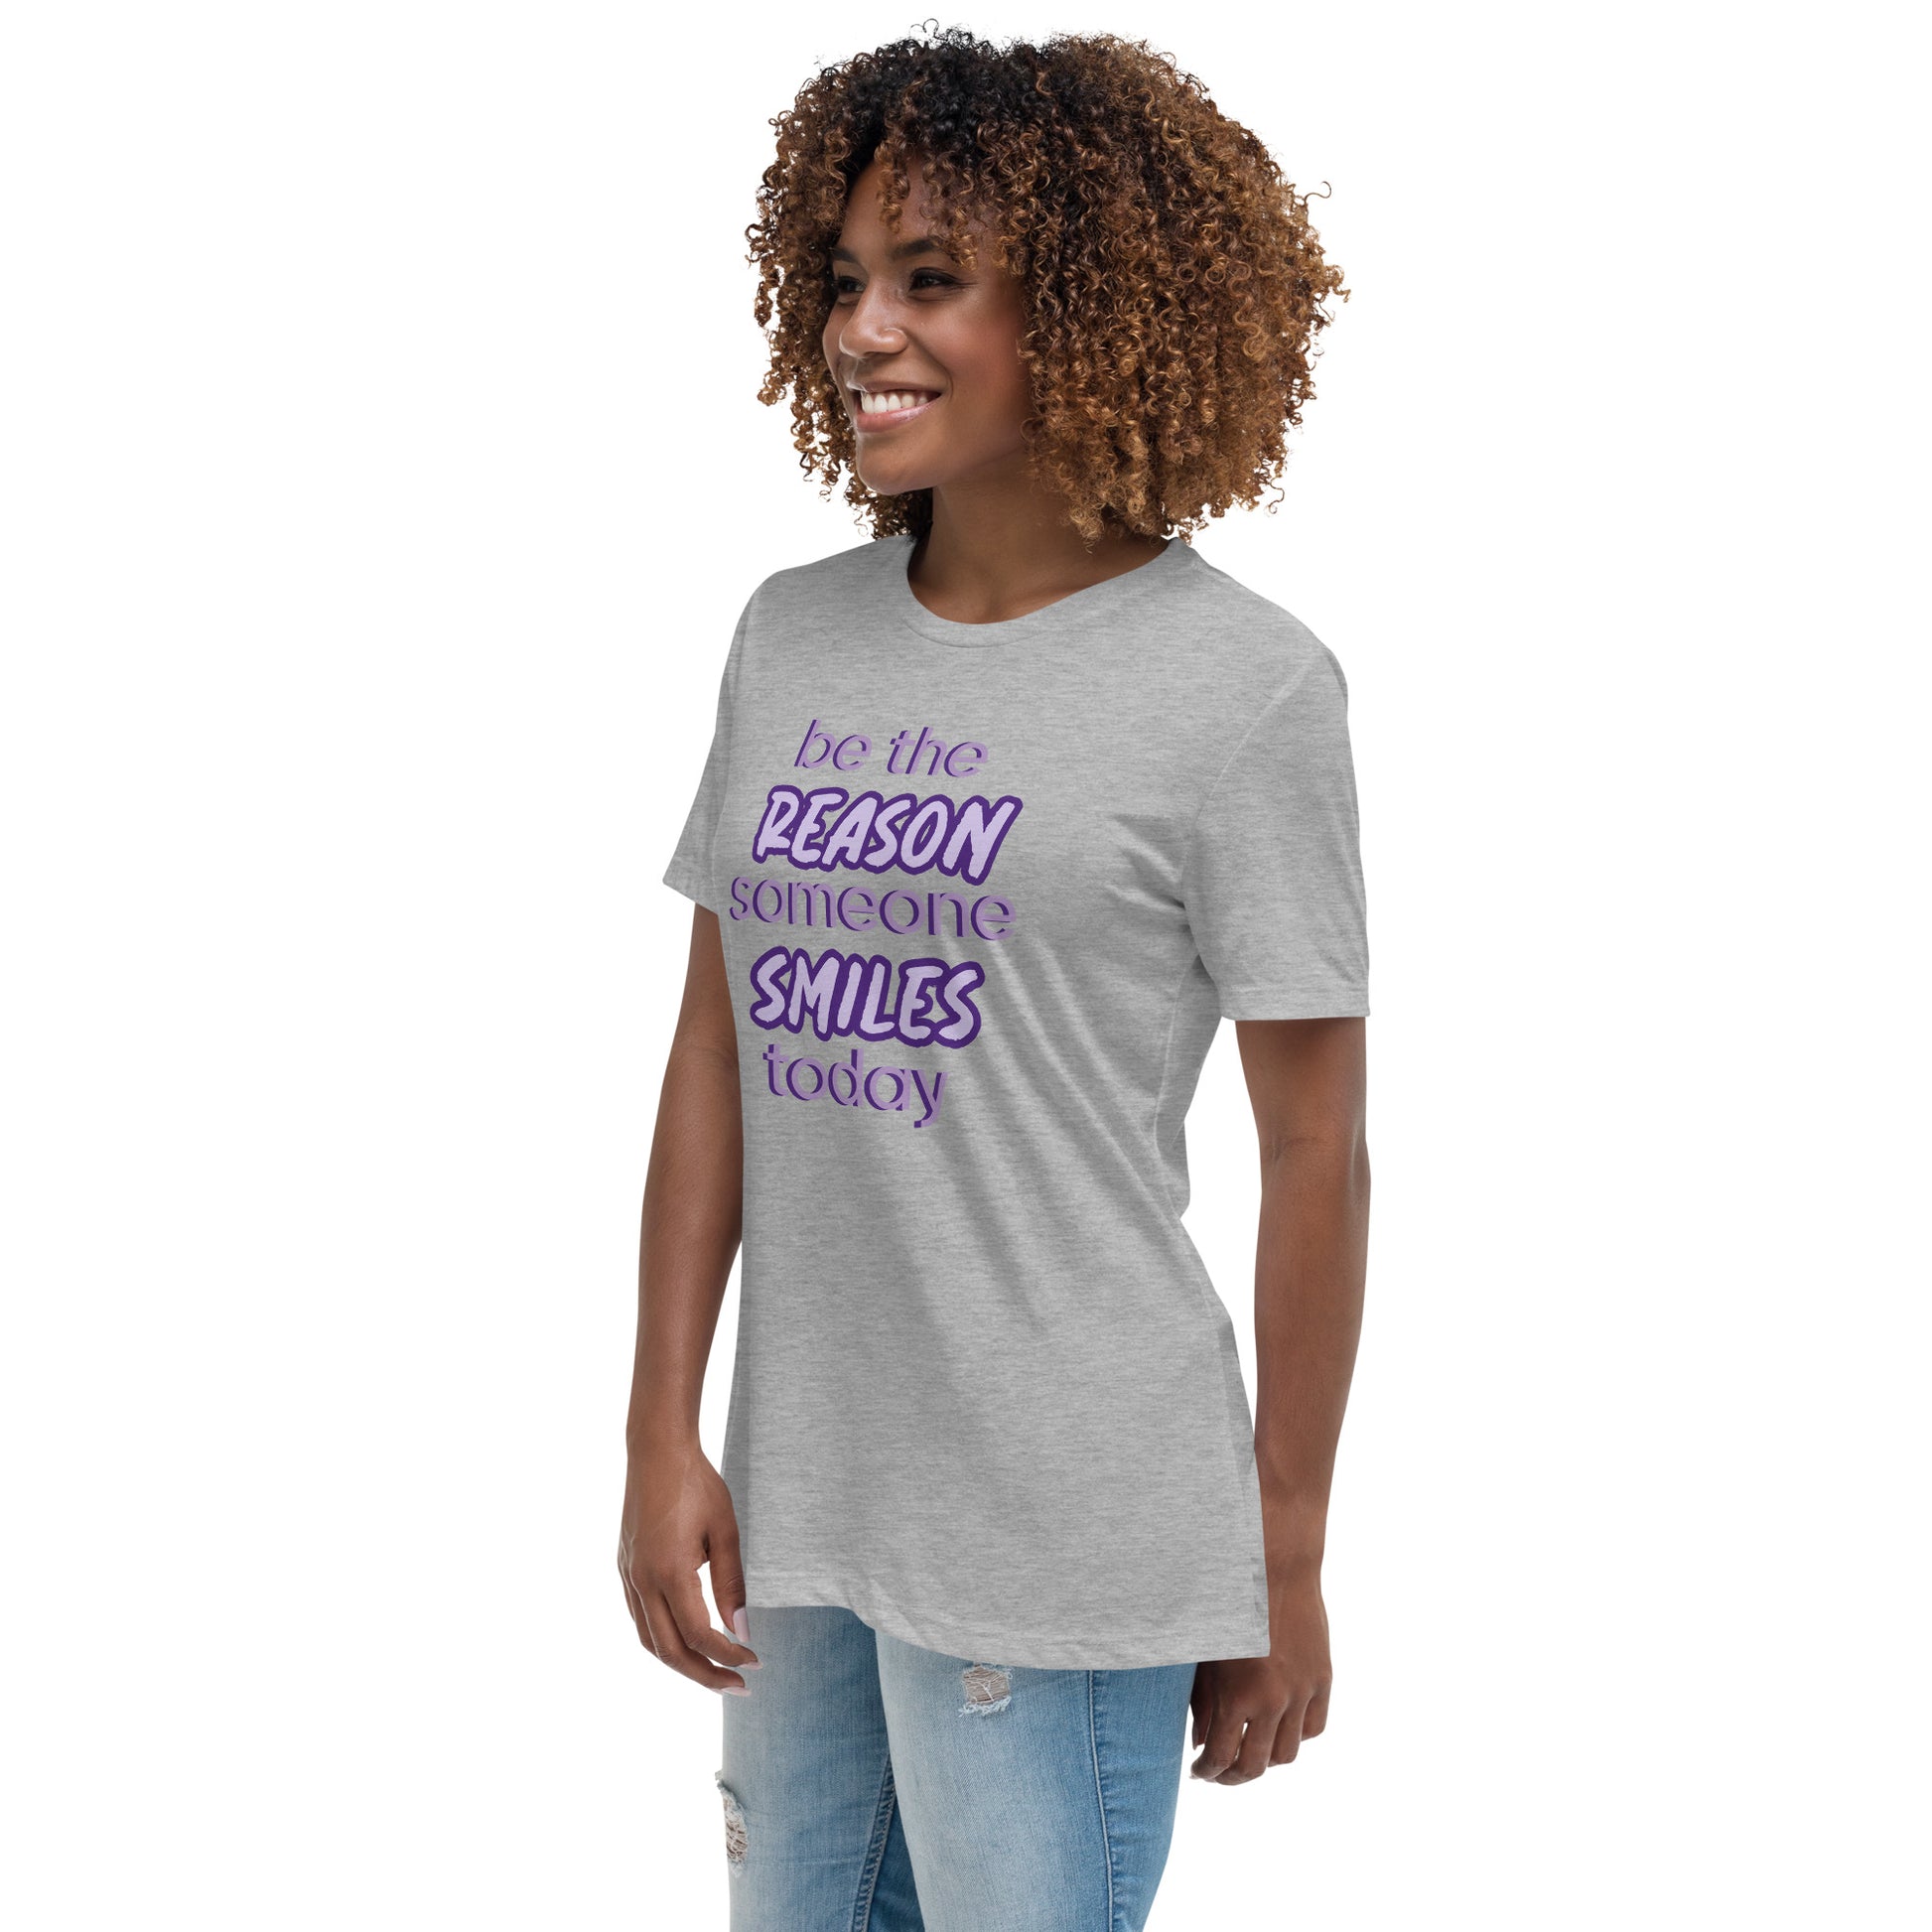 Woman with athletic grey T-shirt and the quote "be the reason someone smiles today" in purple on it. 